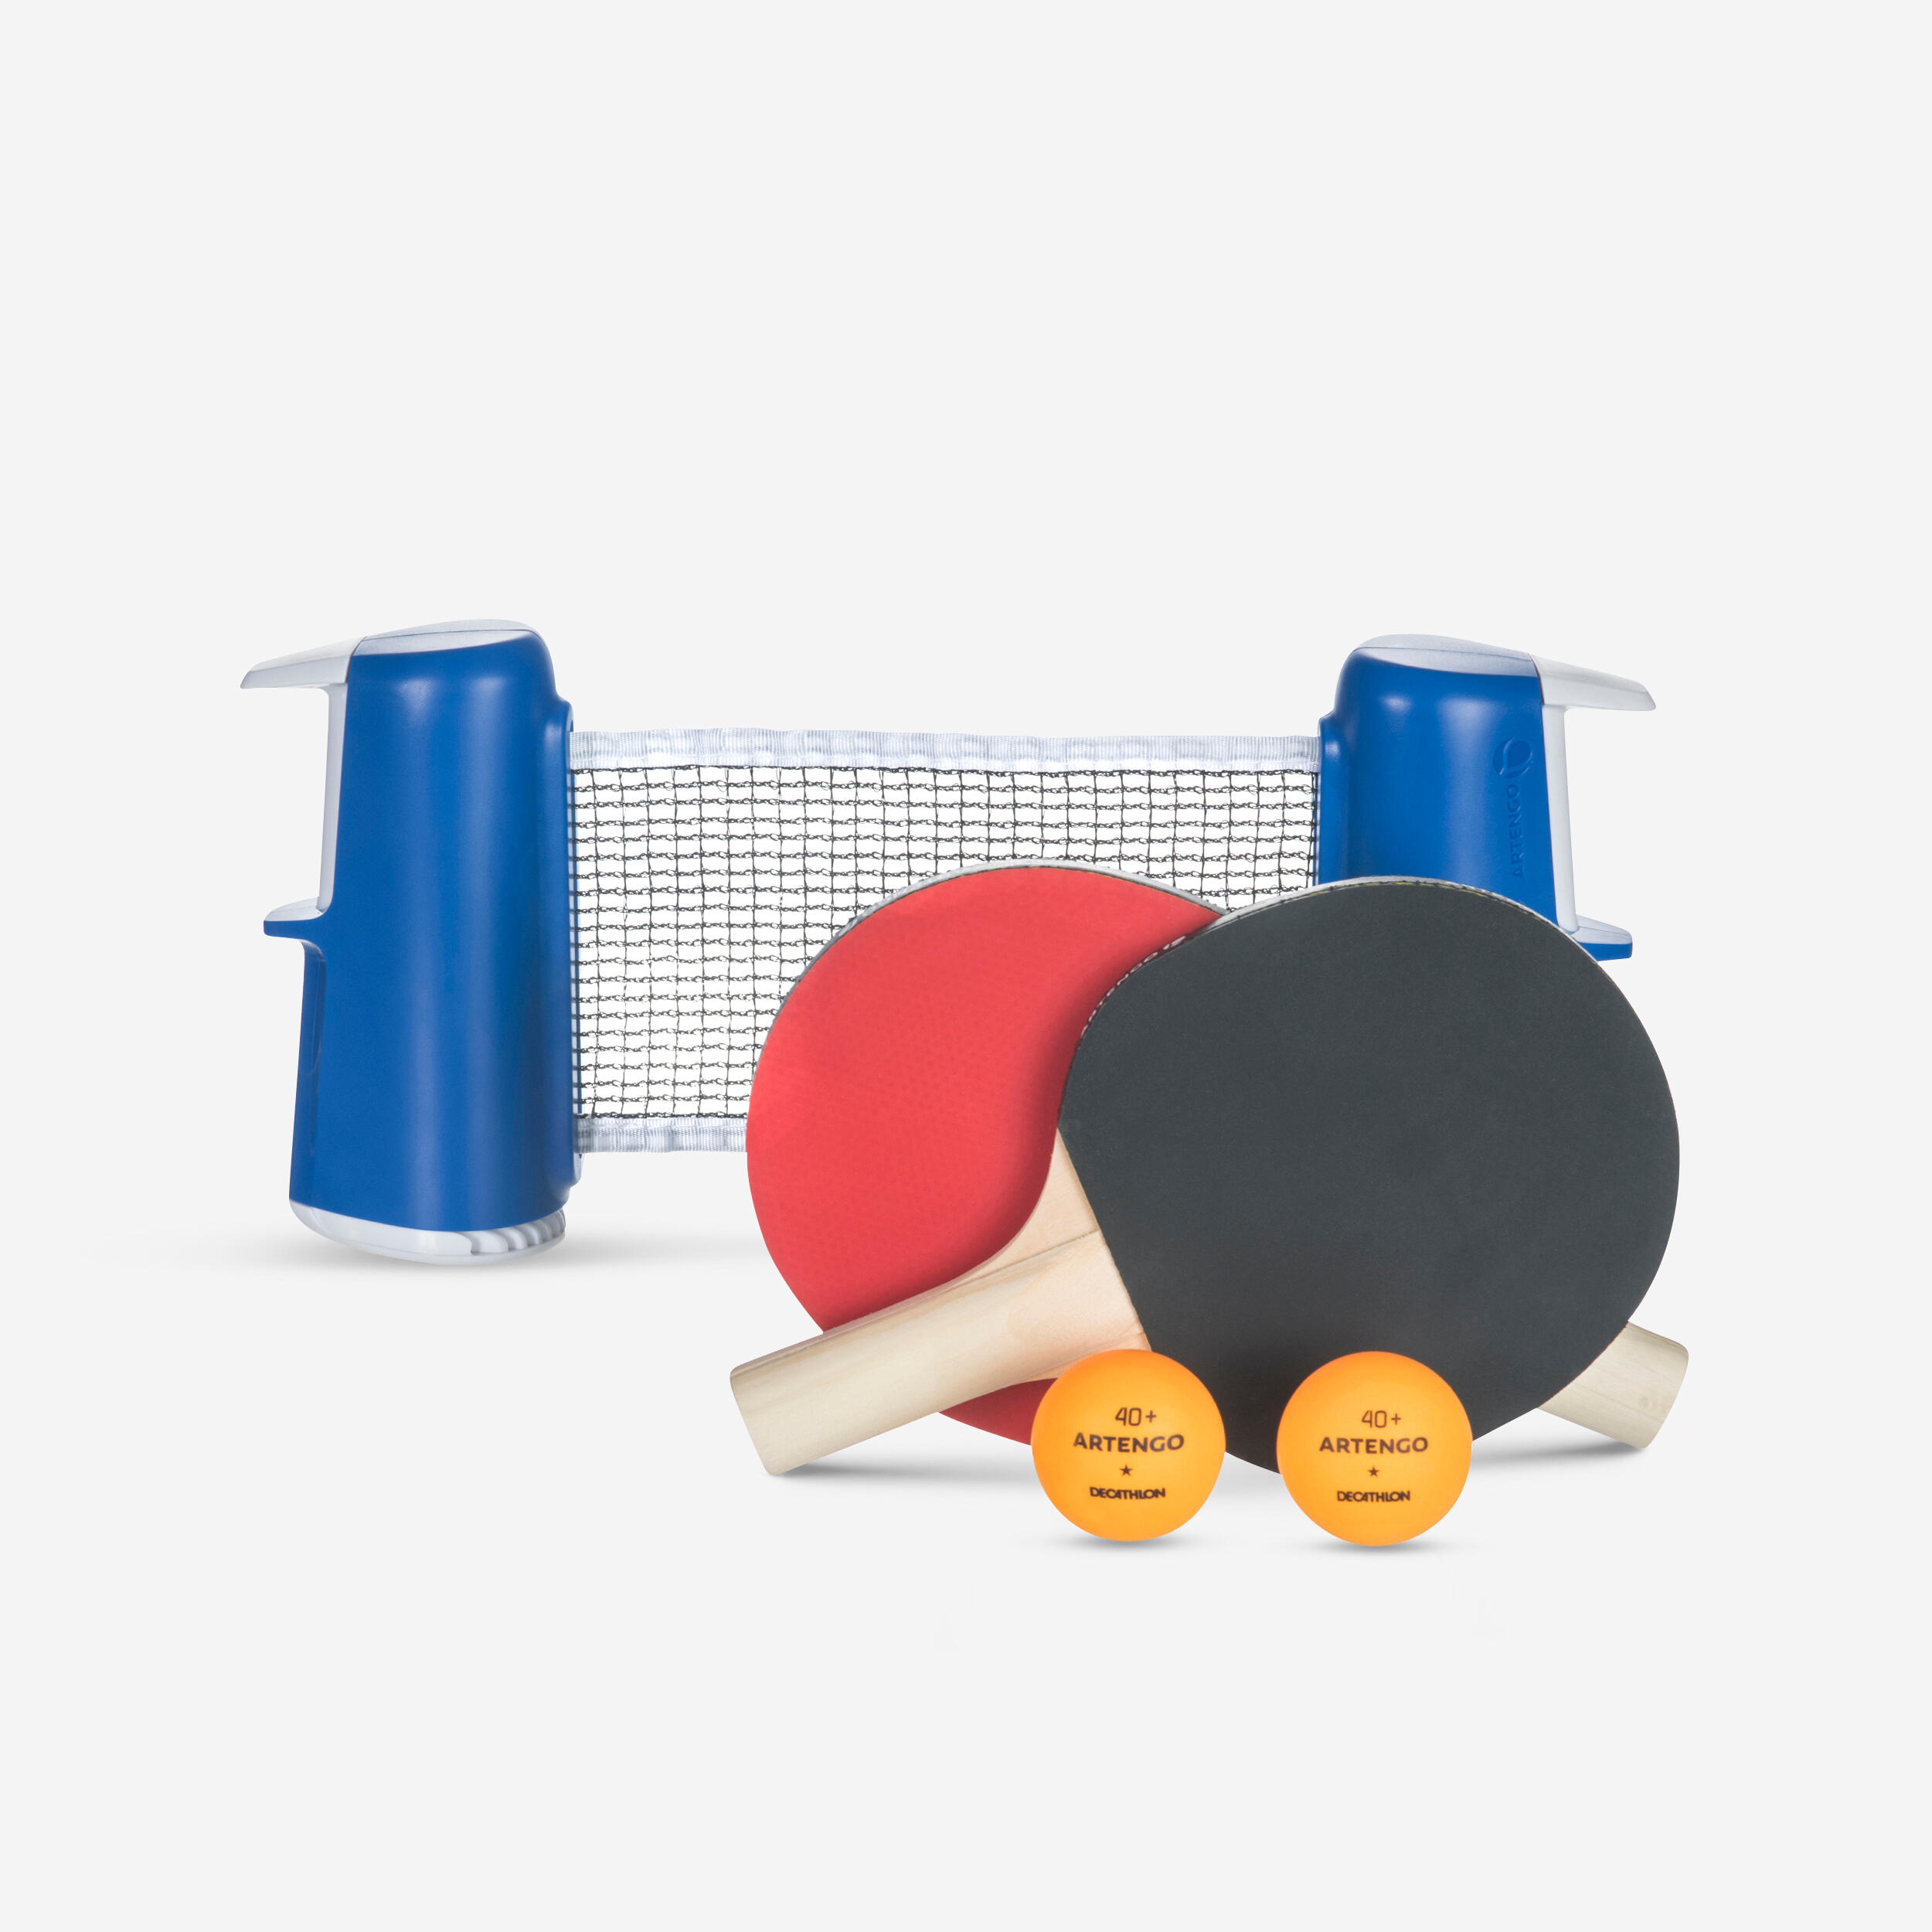 Penn Everywhere Table Tennis Net & Post Set, 2 Paddles and 3 Balls, Size: Up to 60in, Red